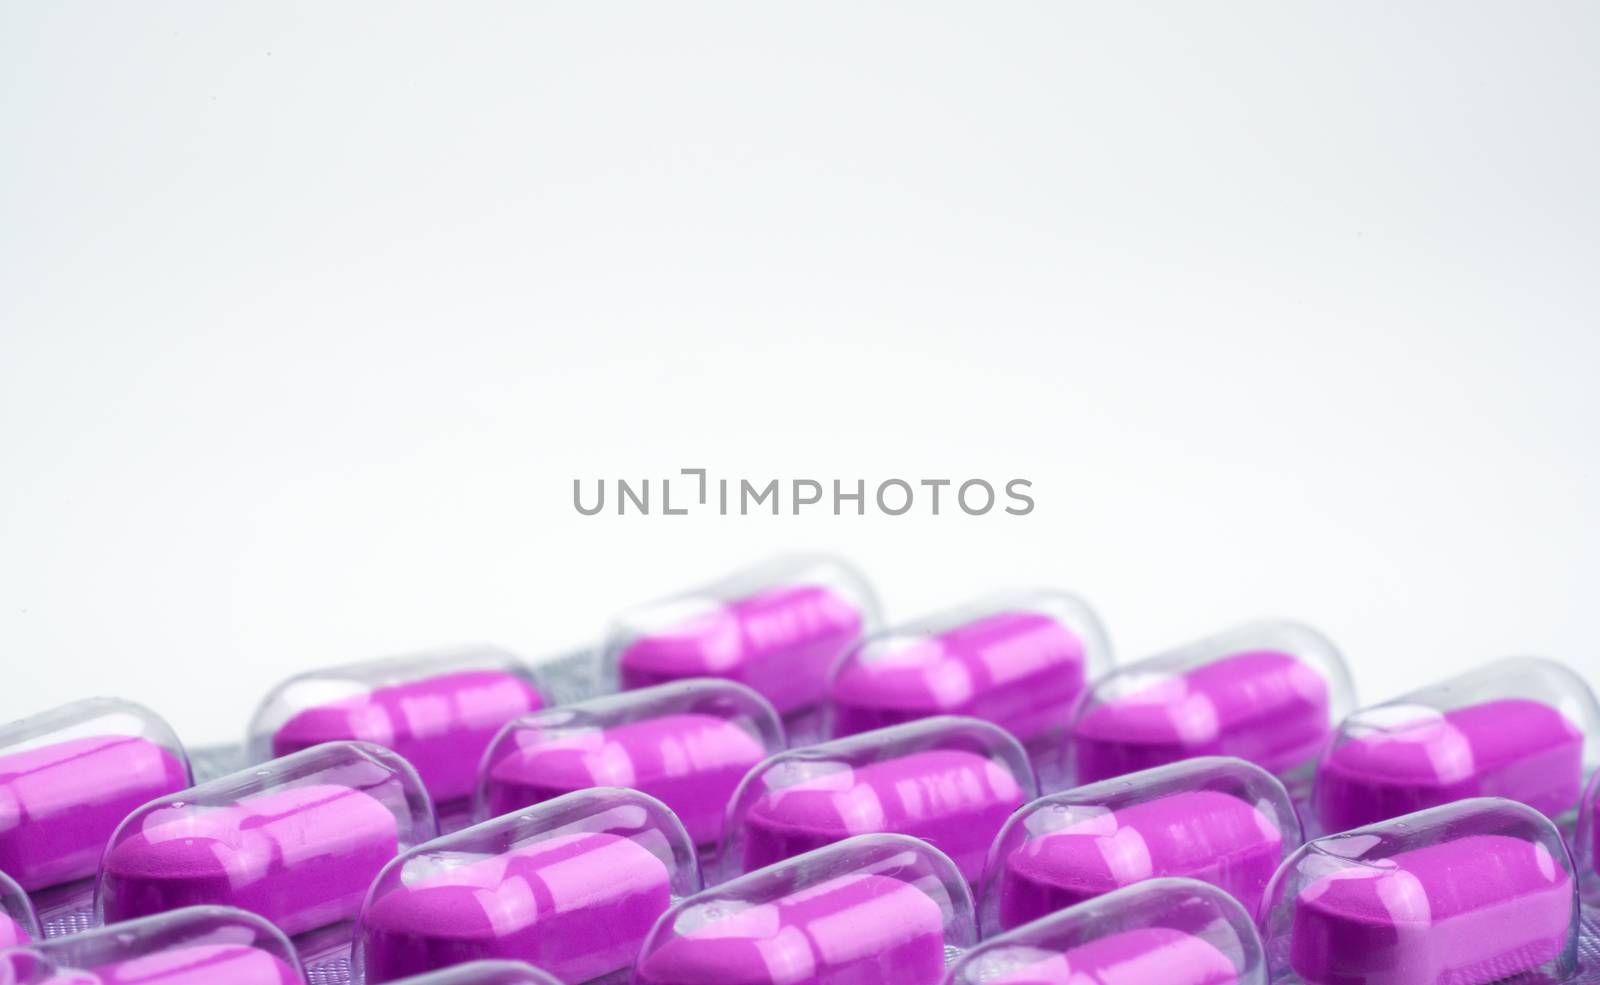 Macro shot of purple caplets pills in blister pack on white background. Mild to moderate pain management. Pain killer medicine. Pills for treatment heart broken concept. NSAIDs. Pharmaceutical packaging industry. Pharmacy background. Global healthcare concept. by Fahroni